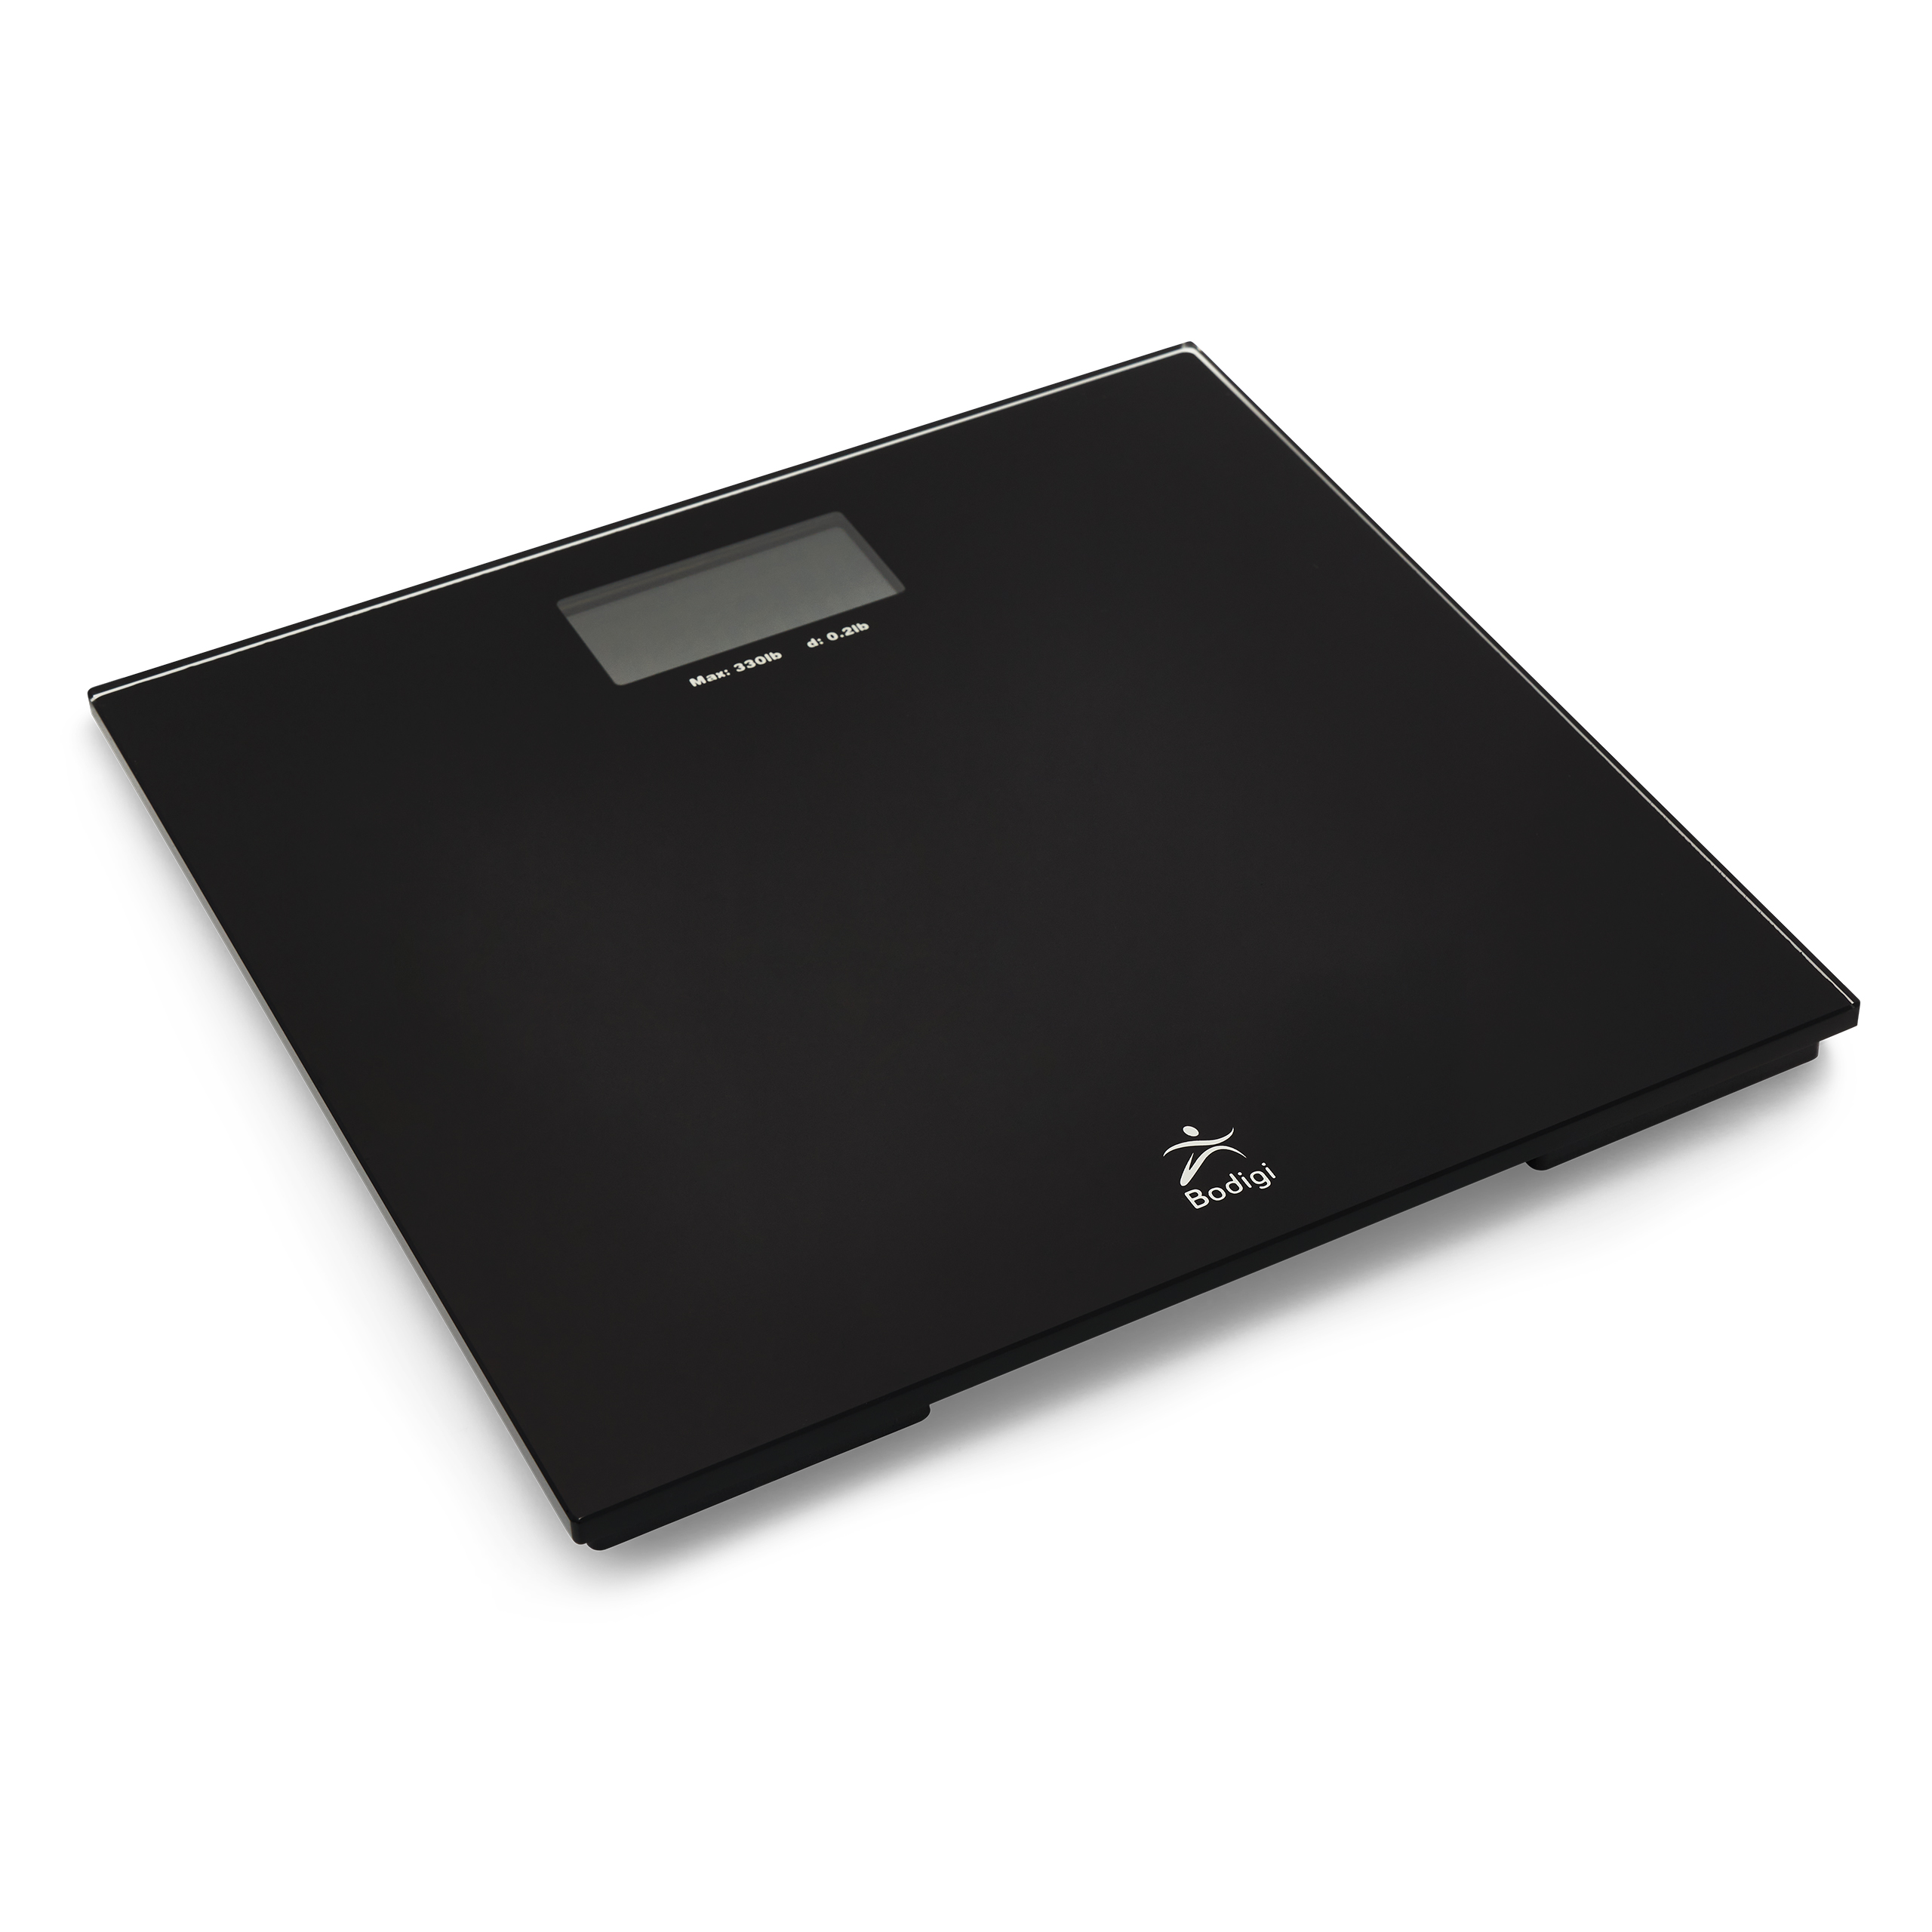 American Weigh Scales - Wireless Bodigi Smart Bathroom Android/IOS Syncing Scale - ESSENTIAL - image 1 of 3